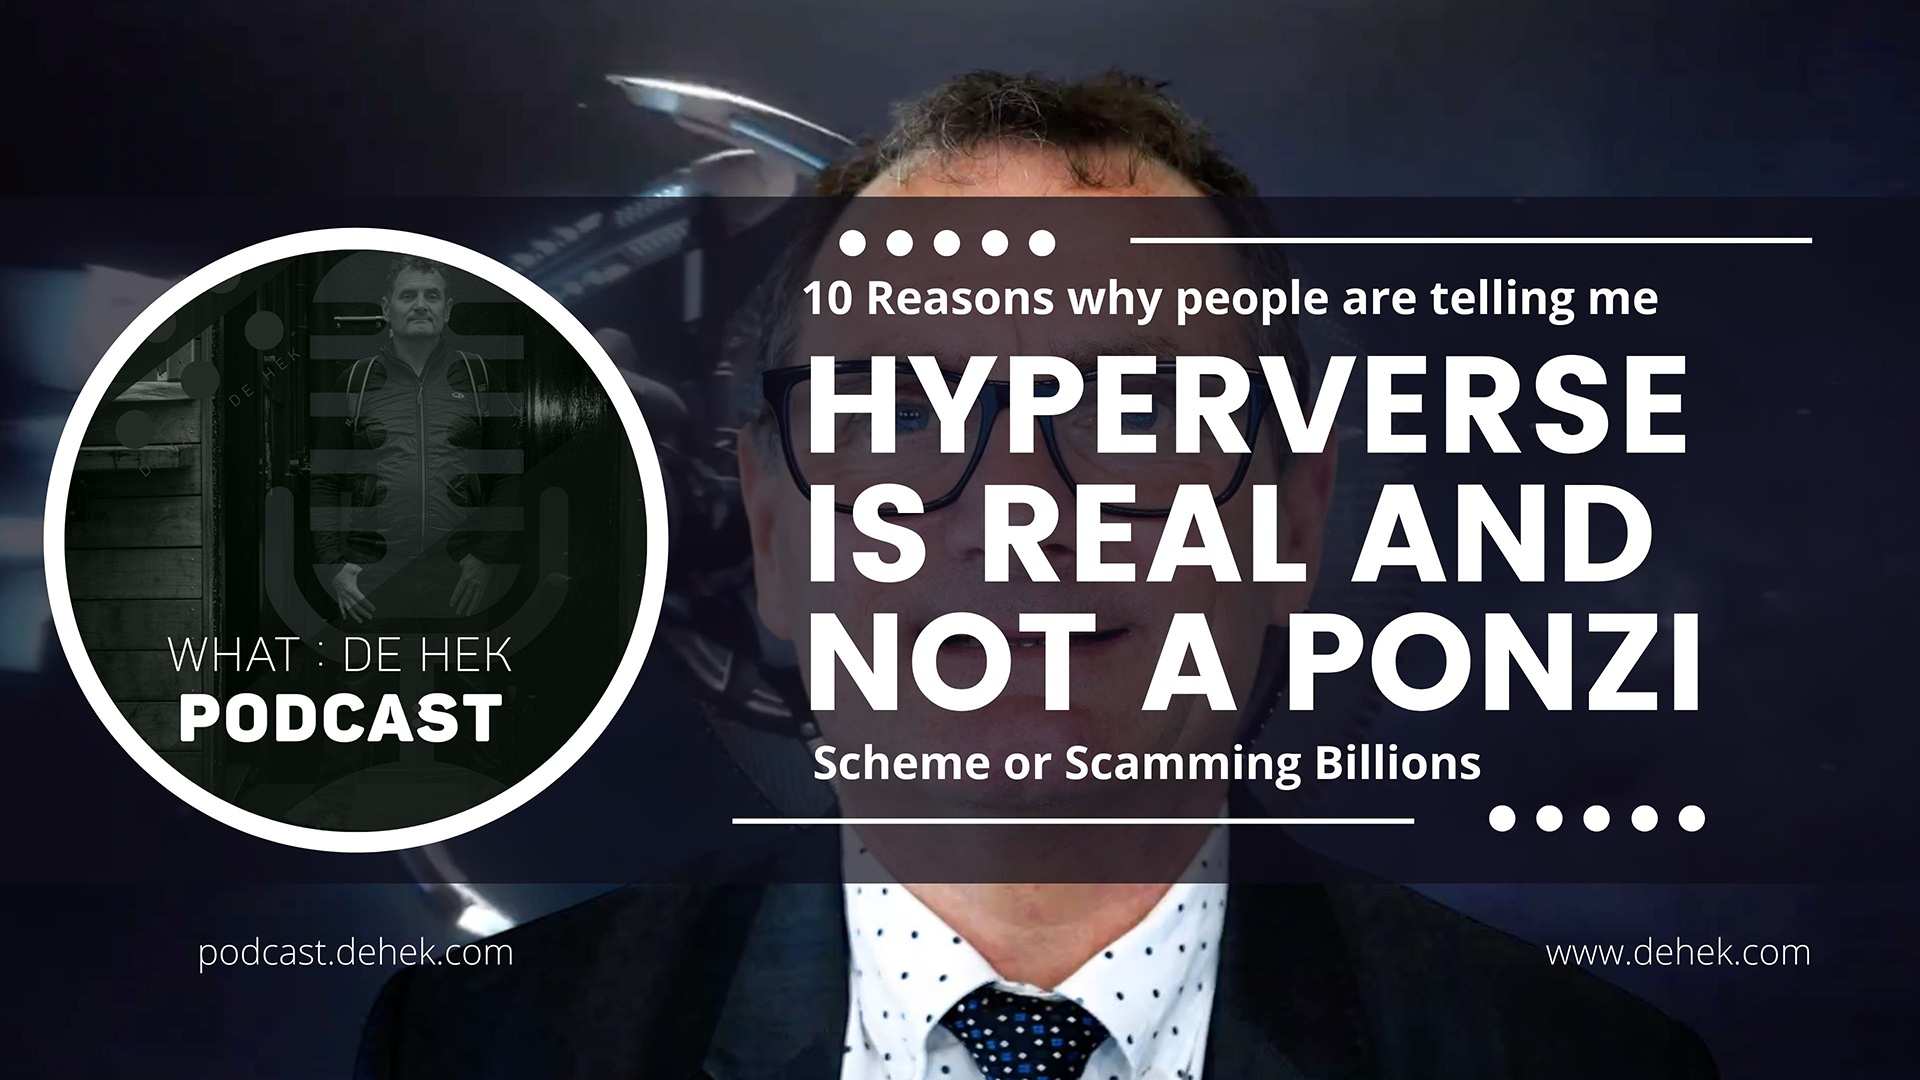 10 Reasons why people are telling me HyperVerse is REAL and NOT a Ponzi Scheme or Scamming Billions